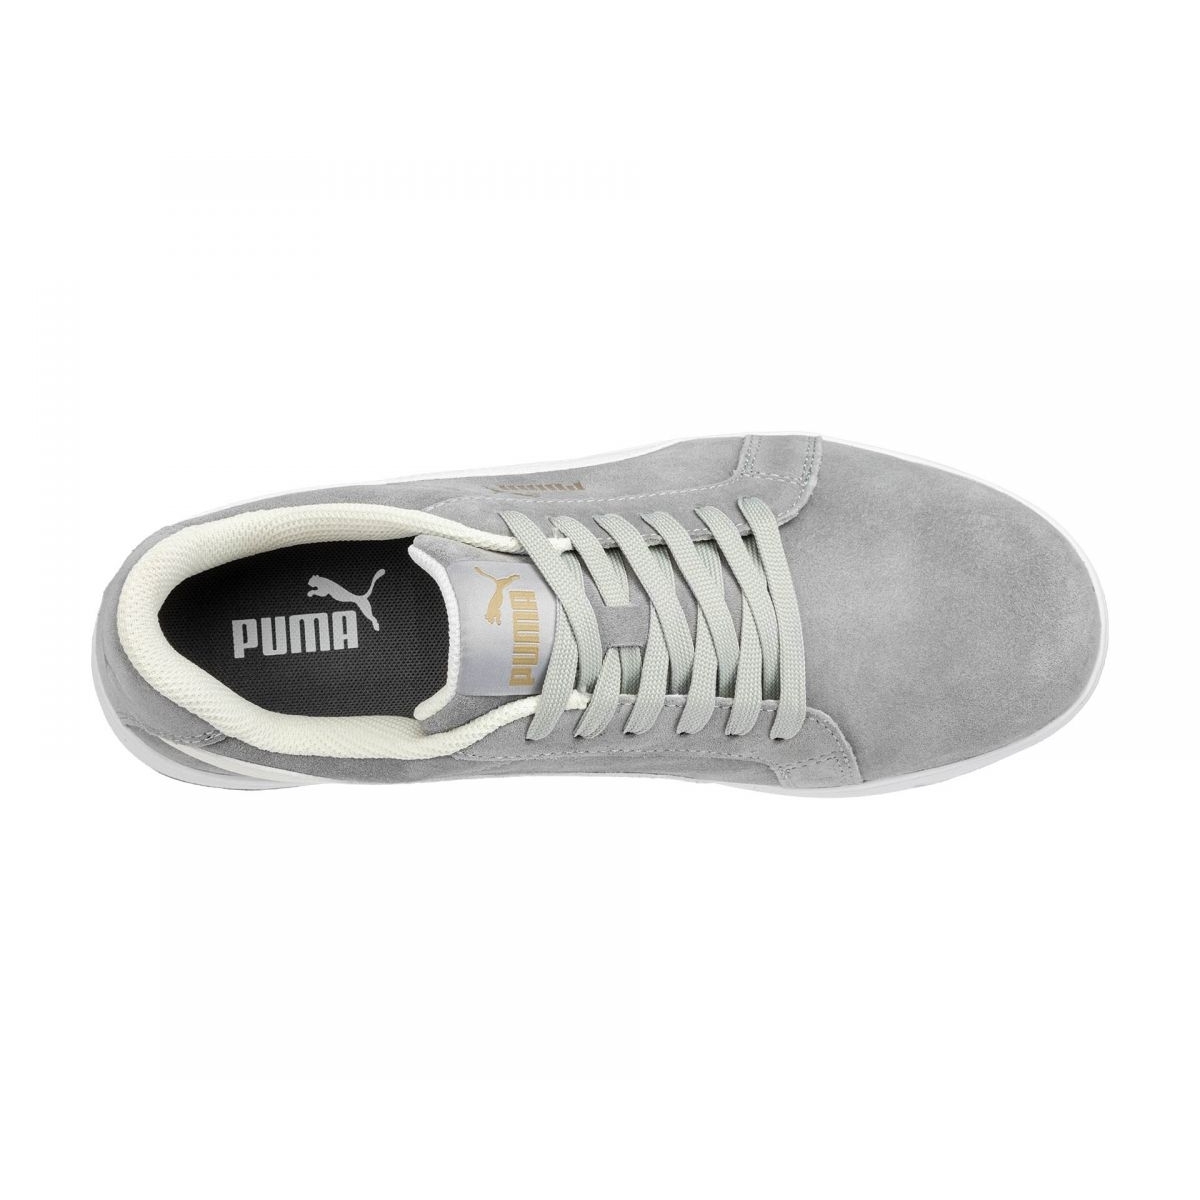 PUMA Safety Men's Iconic Low Composite Toe SD Work Shoes Grey Suede - 640035 Grey - Grey, 11